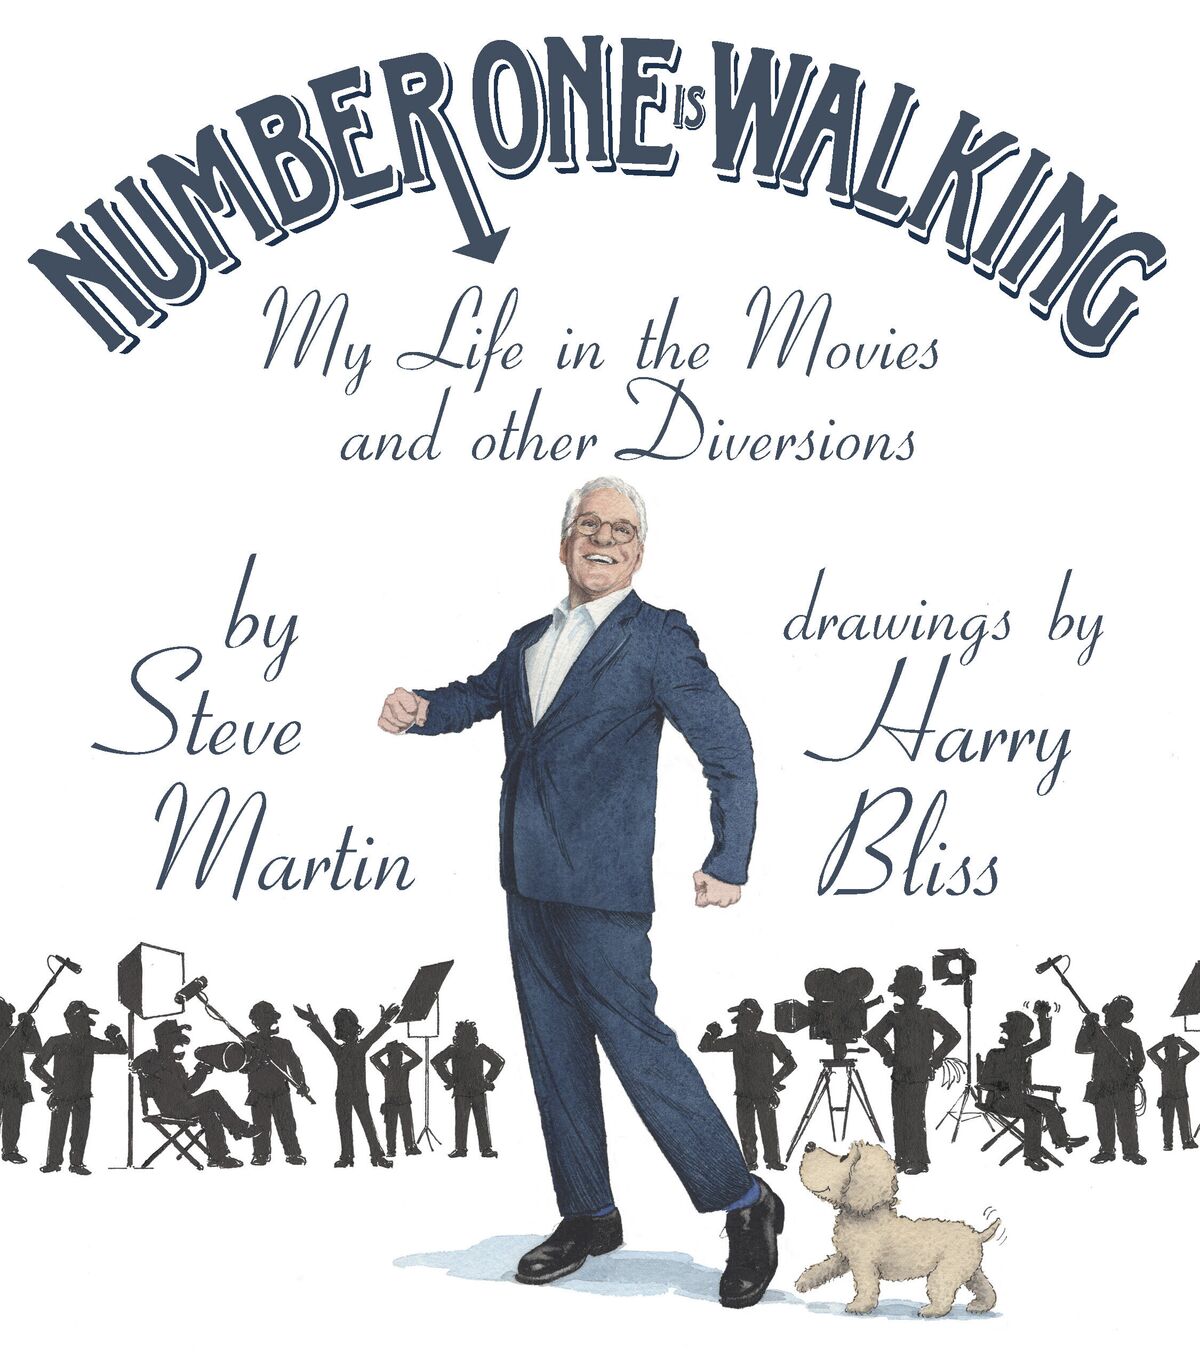 Review: Steve Martin Slips With Funny But Thin Movie Memoir - Bloomberg